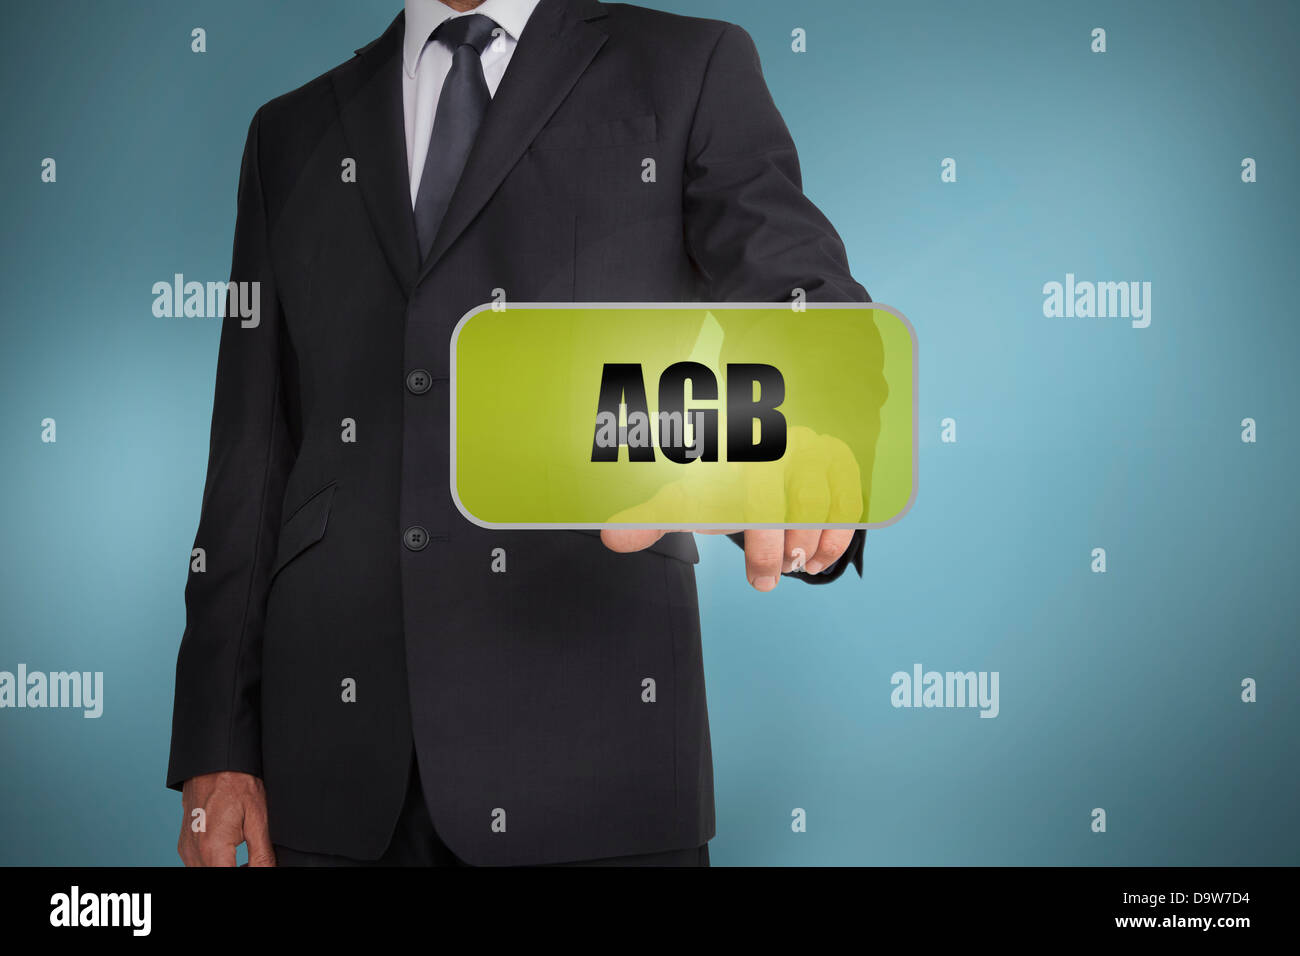 Businessman selecting green label with agb written on it Stock Photo